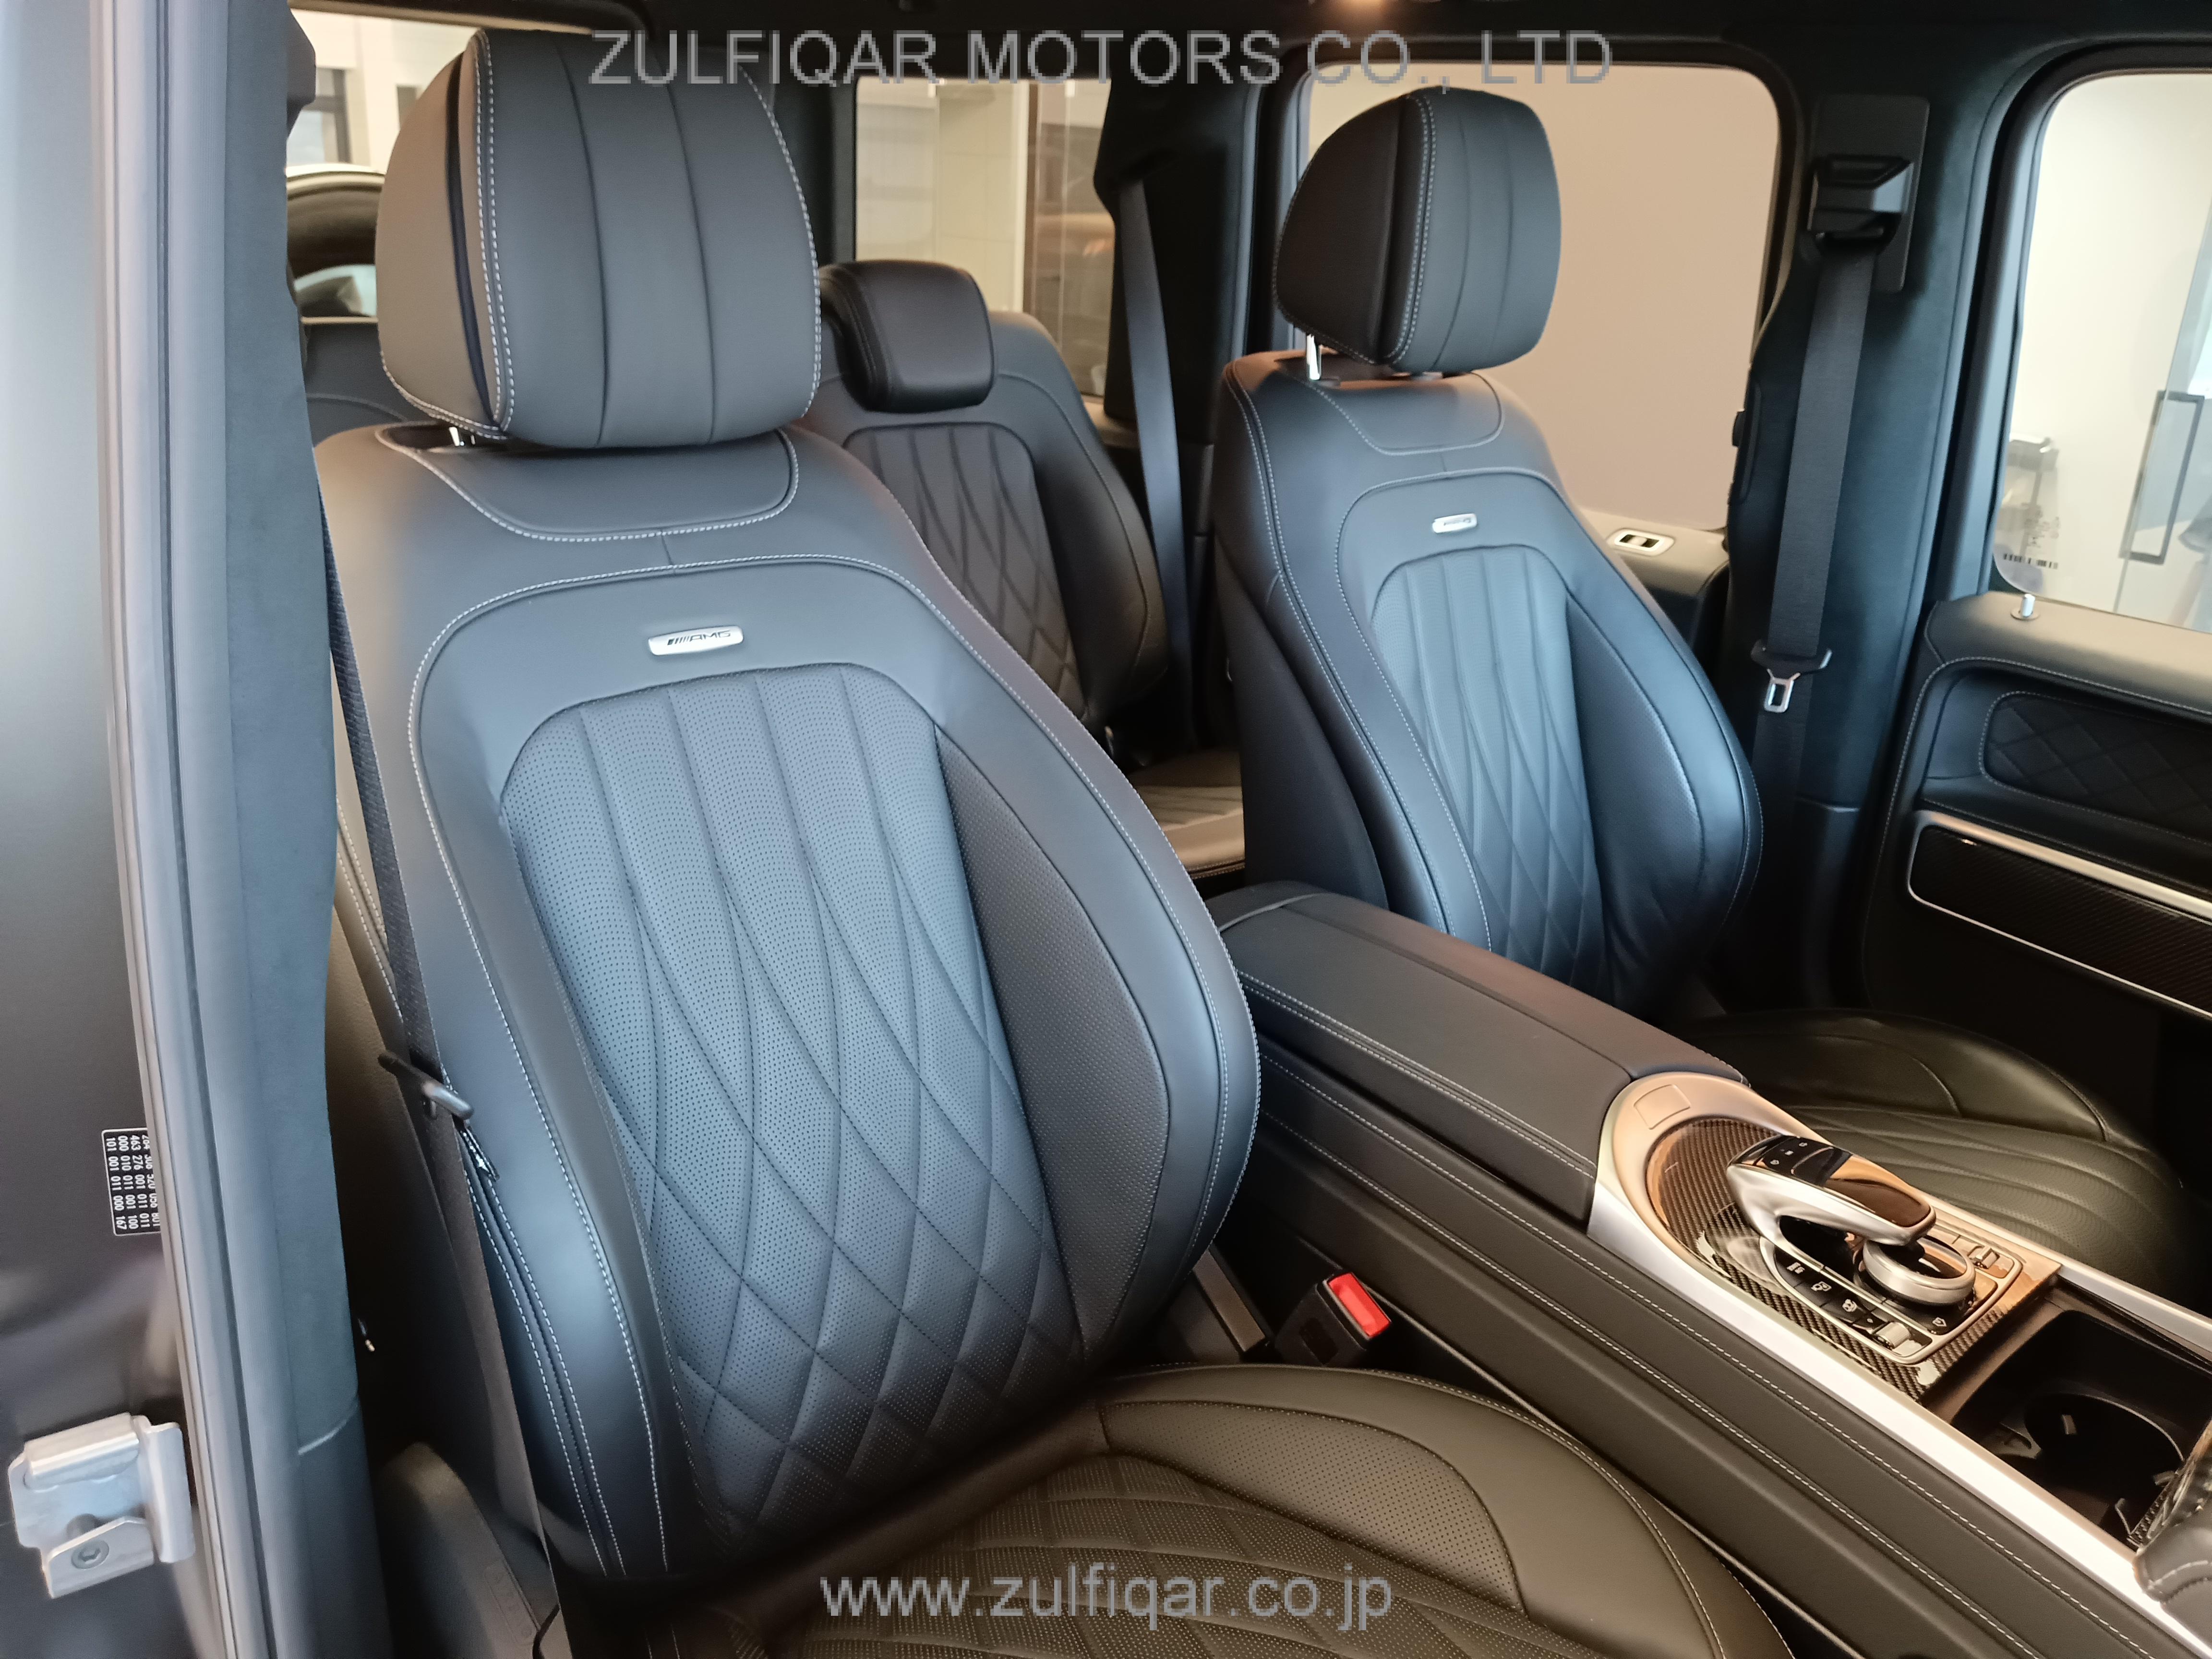 MERCEDES AMG G CLASS 2019 Image 52